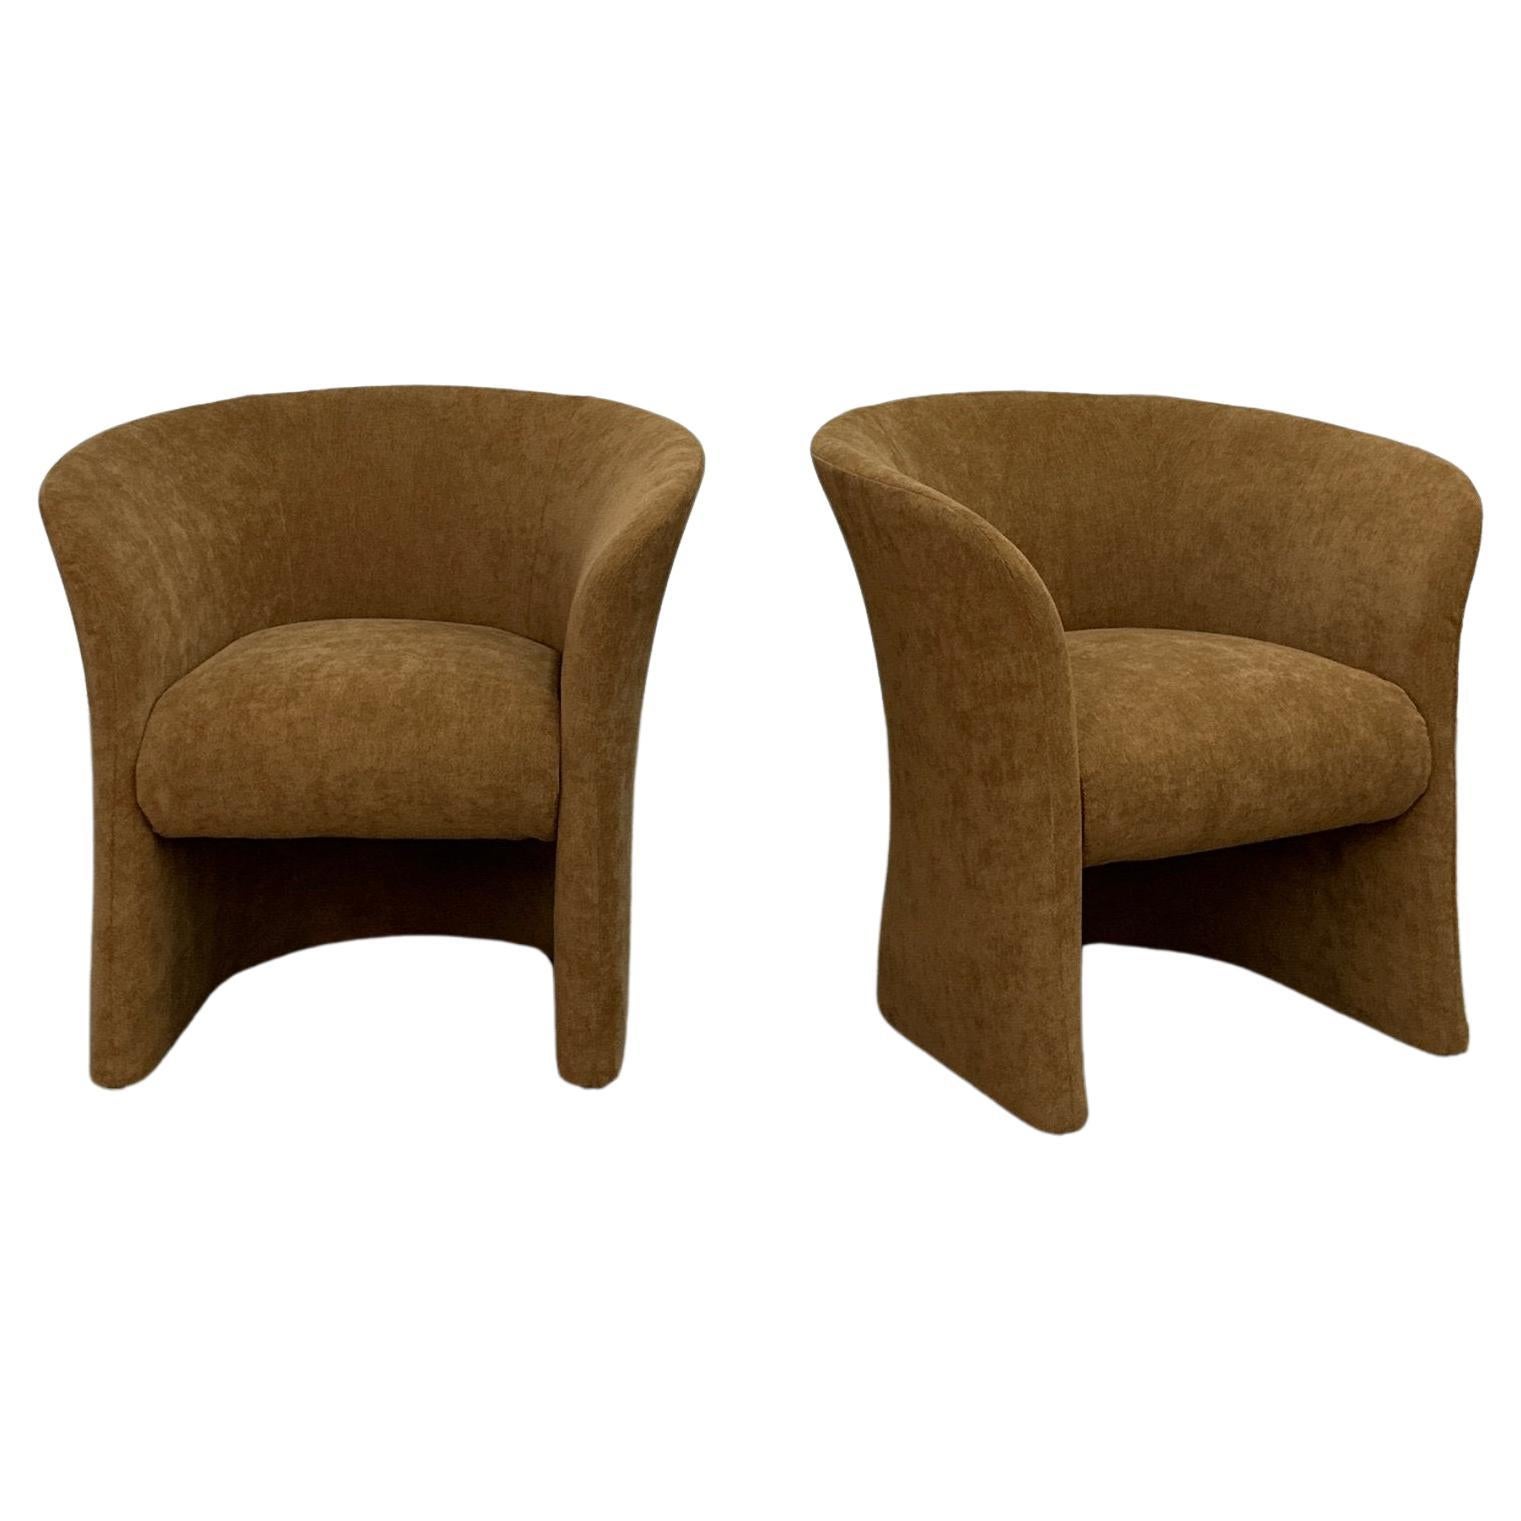 Post Modern Accent Chairs - Paar